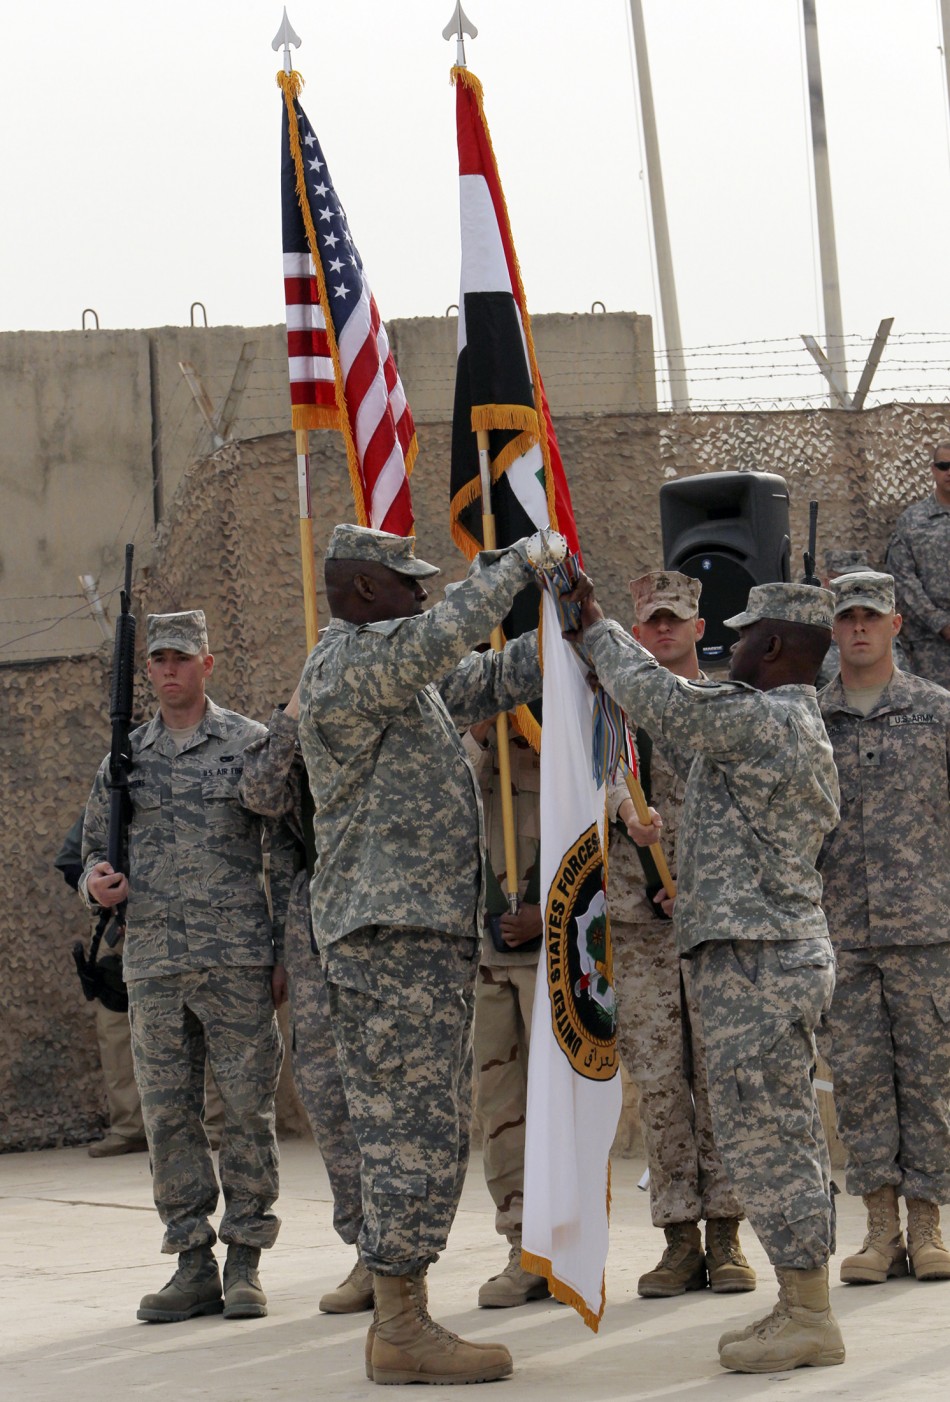 Members of the U.S. military retire its ceremonial flags signifying the end of their presence in Iraq at the Baghdad Diplomatic Support Center